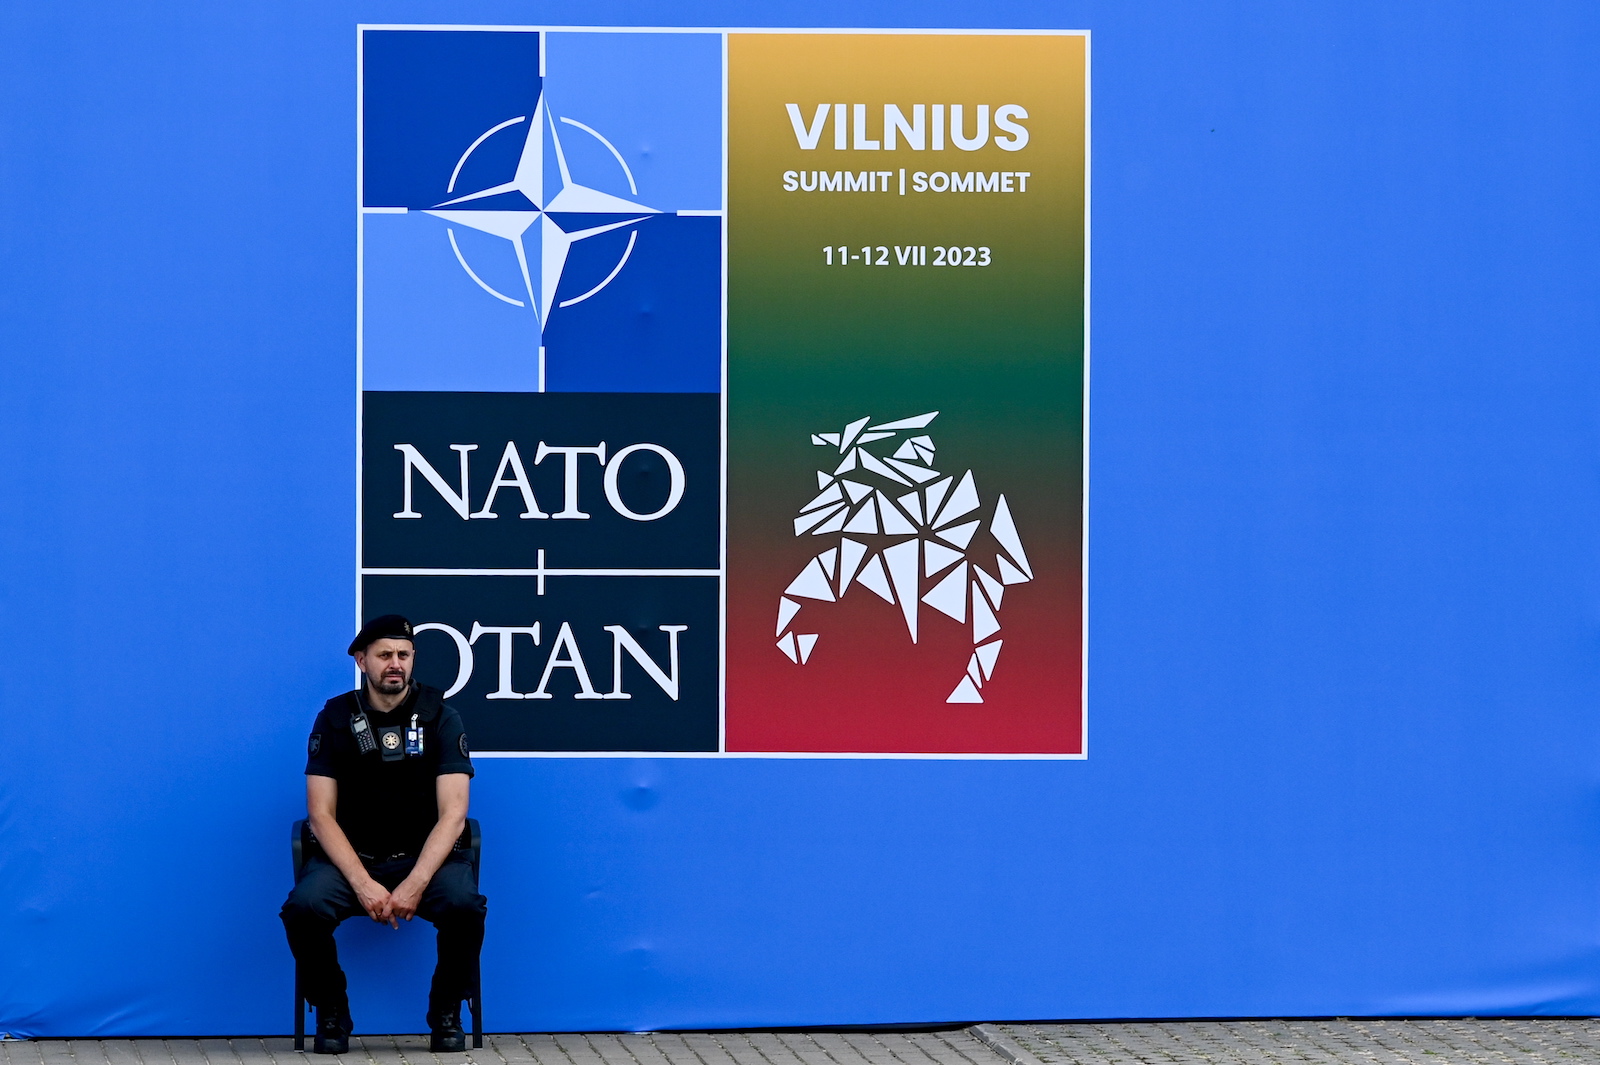 epa10735615 A security guard at NATO summit venue in Vilnius, Lithuania, 09 July 2023. NATO Summit will take place in Vilnius on 11 and 12 July 2023.  EPA/FILIP SINGER